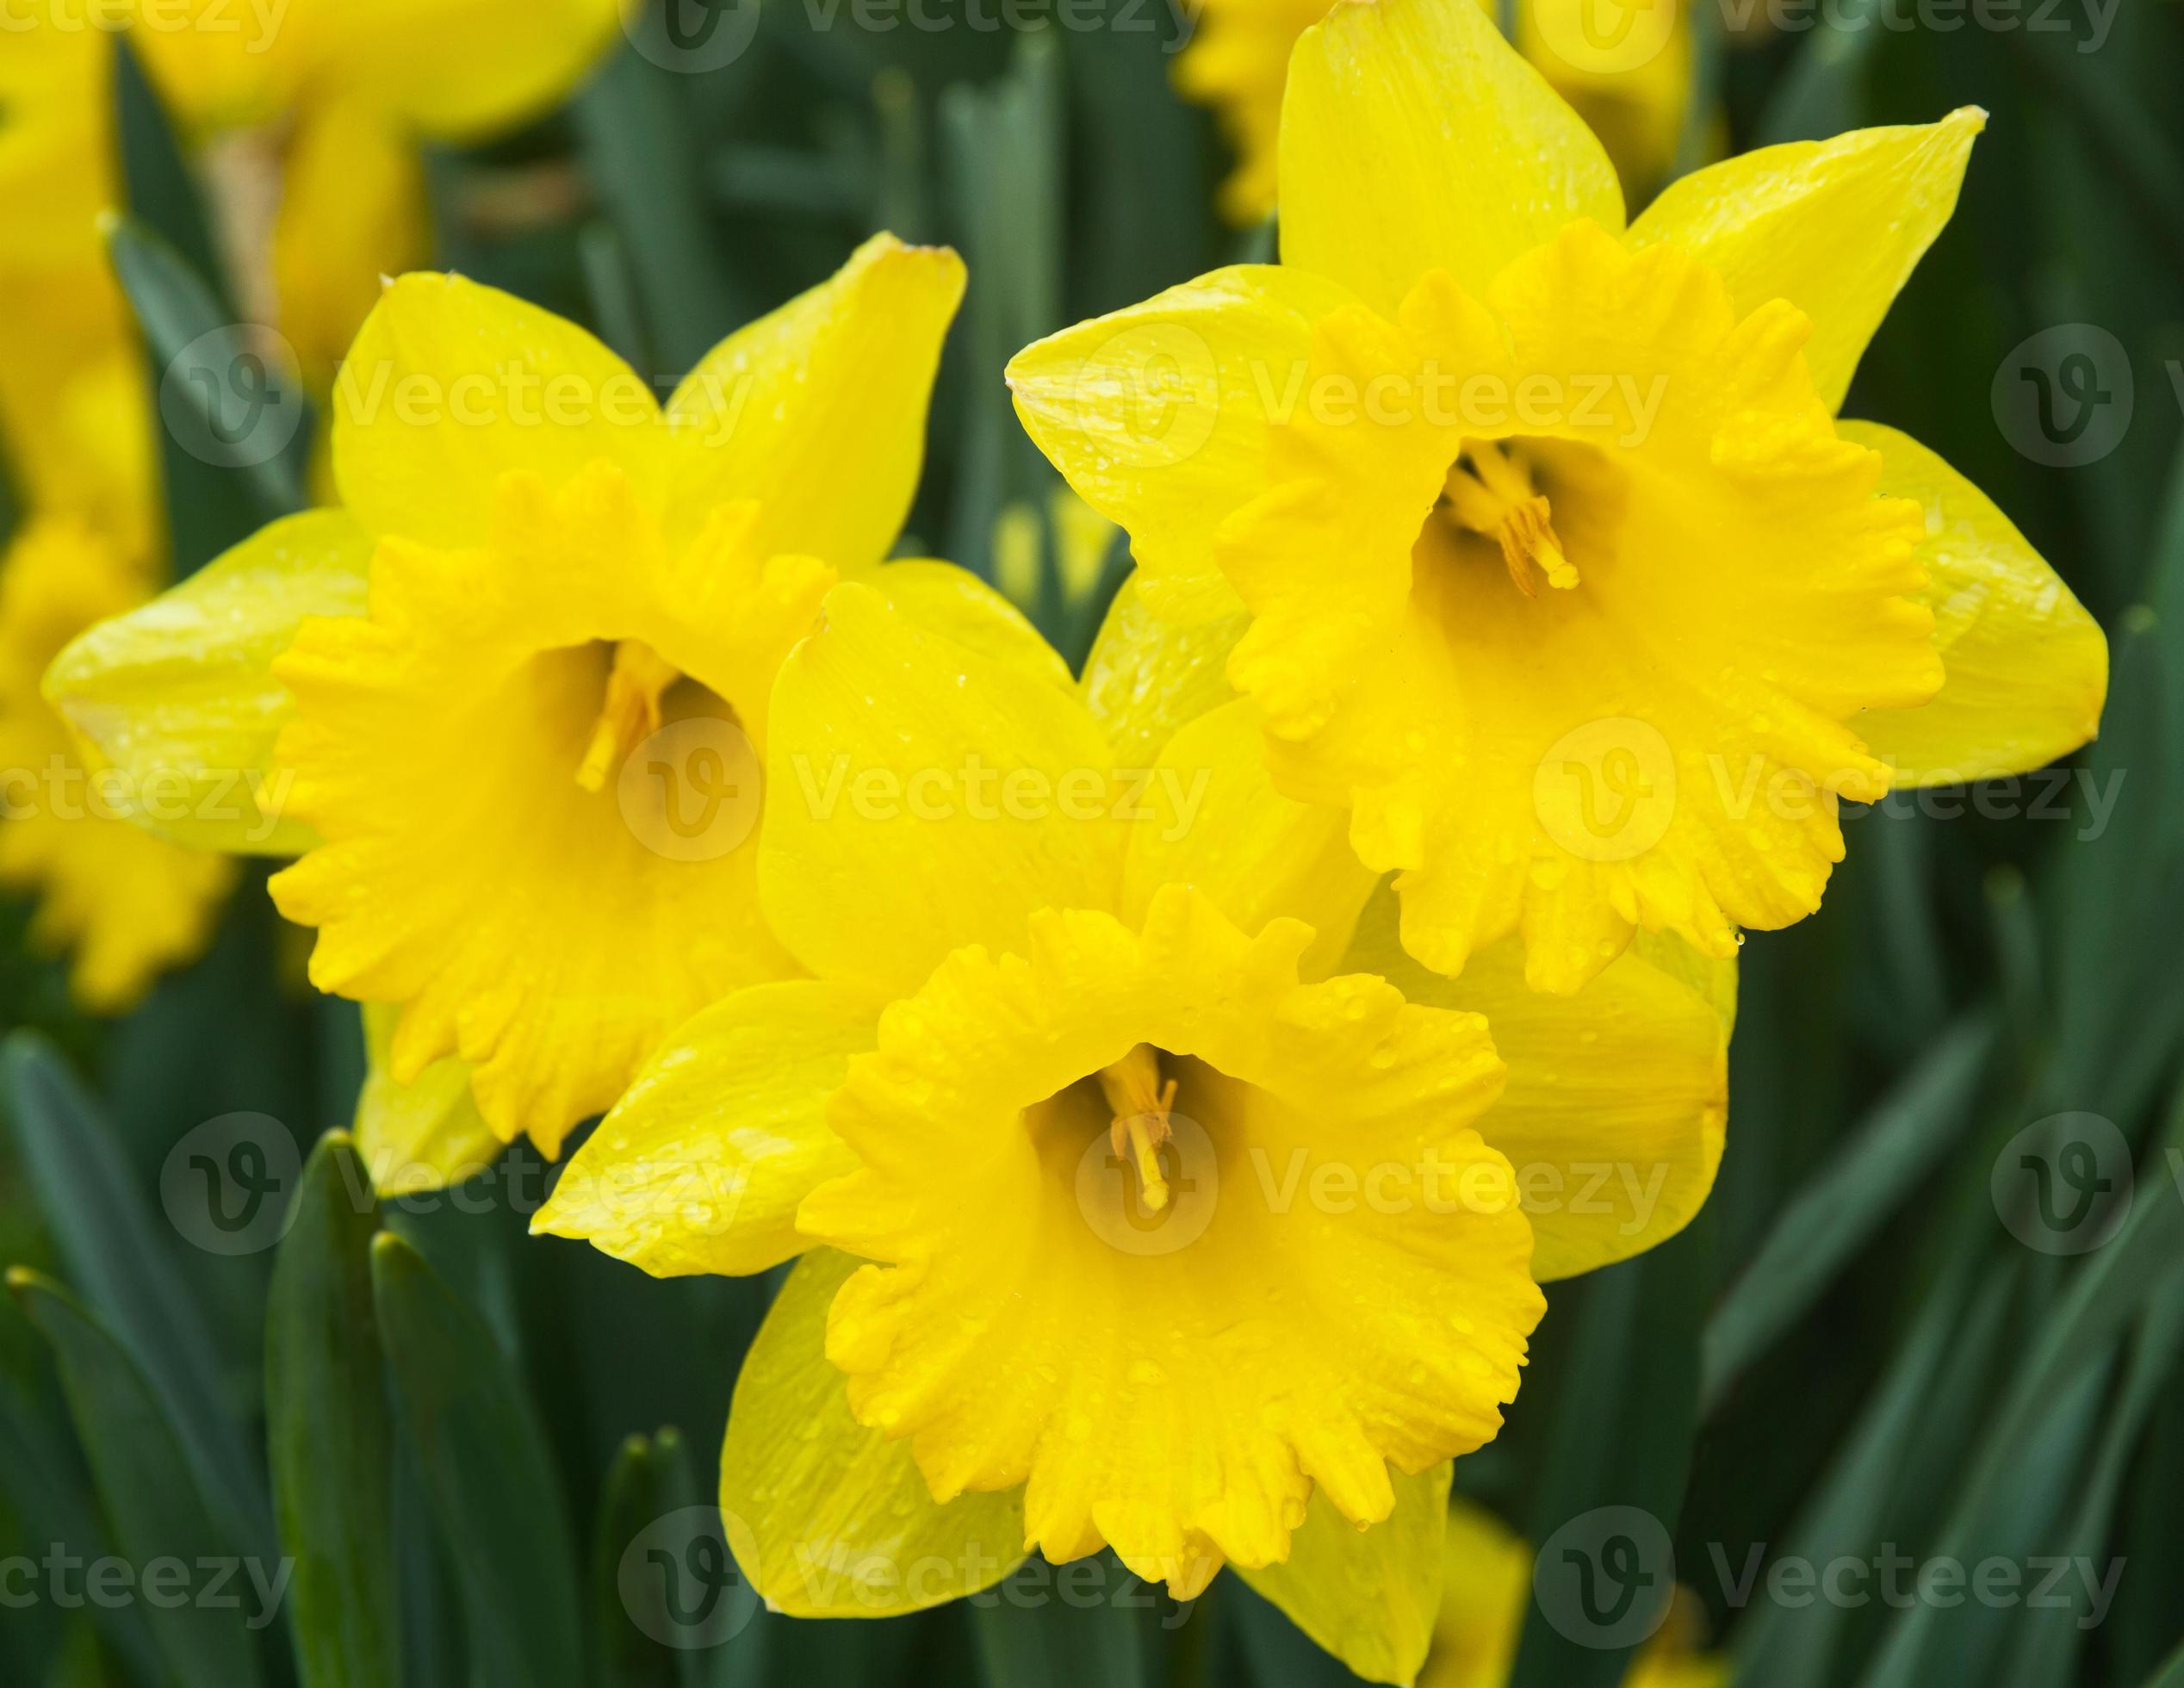 Daffodils Flowers - Flores de Narcisos 1344523 Stock Photo at Vecteezy